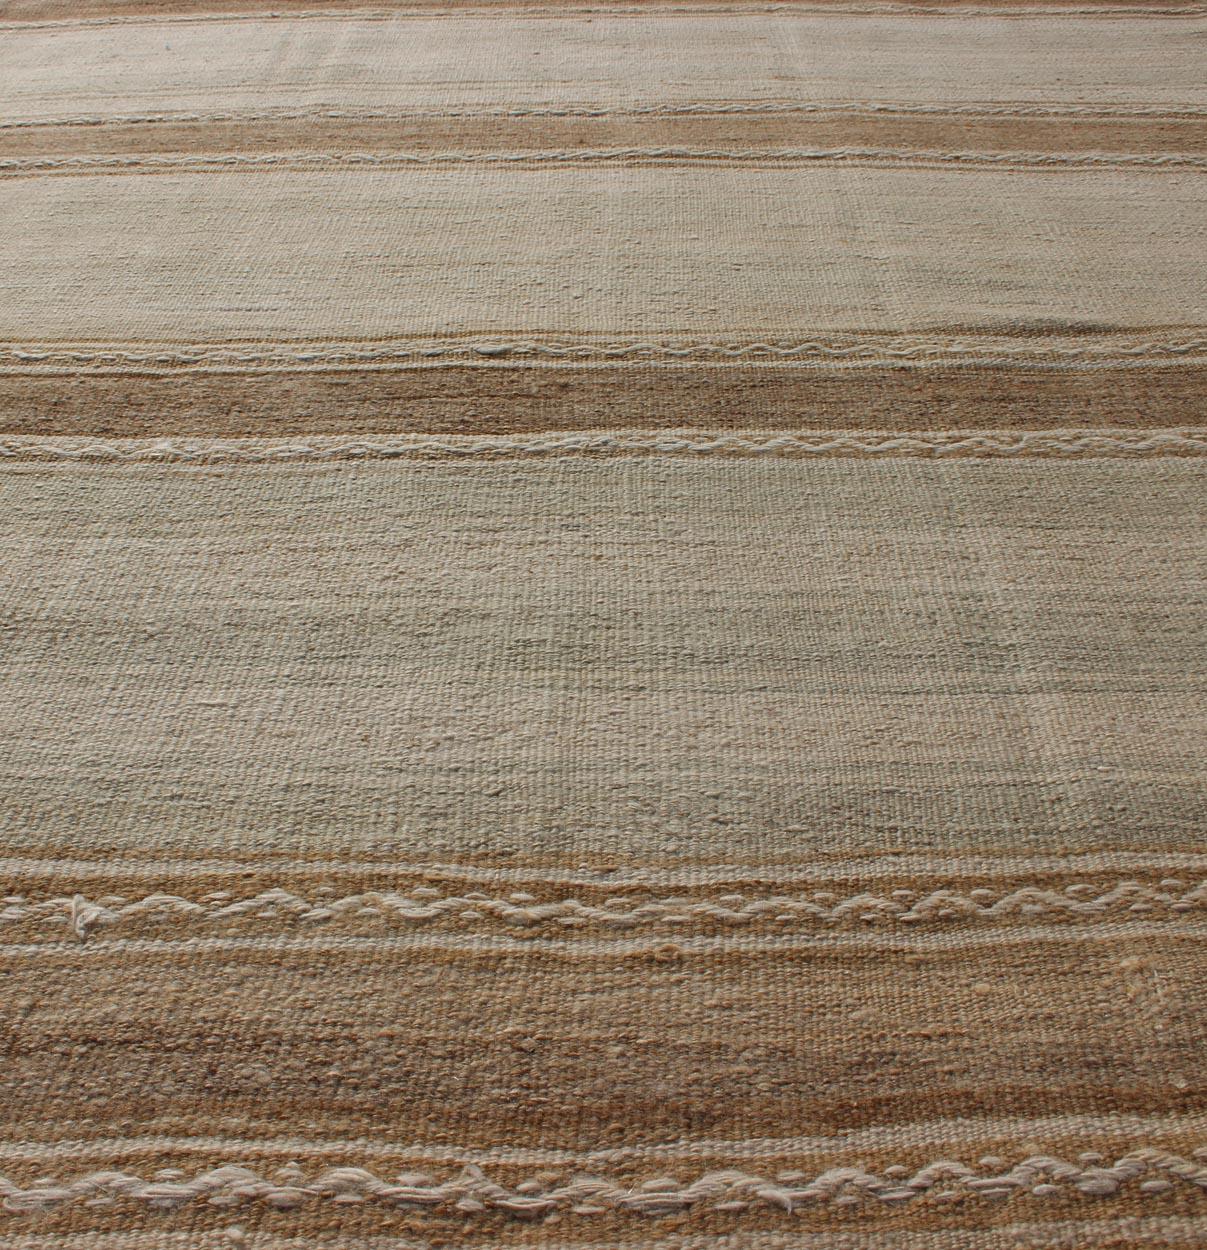 Turkish Vintage Kilim Rug with in Taupe, Brown, Faint Gray Blue, and Earth Tones For Sale 1